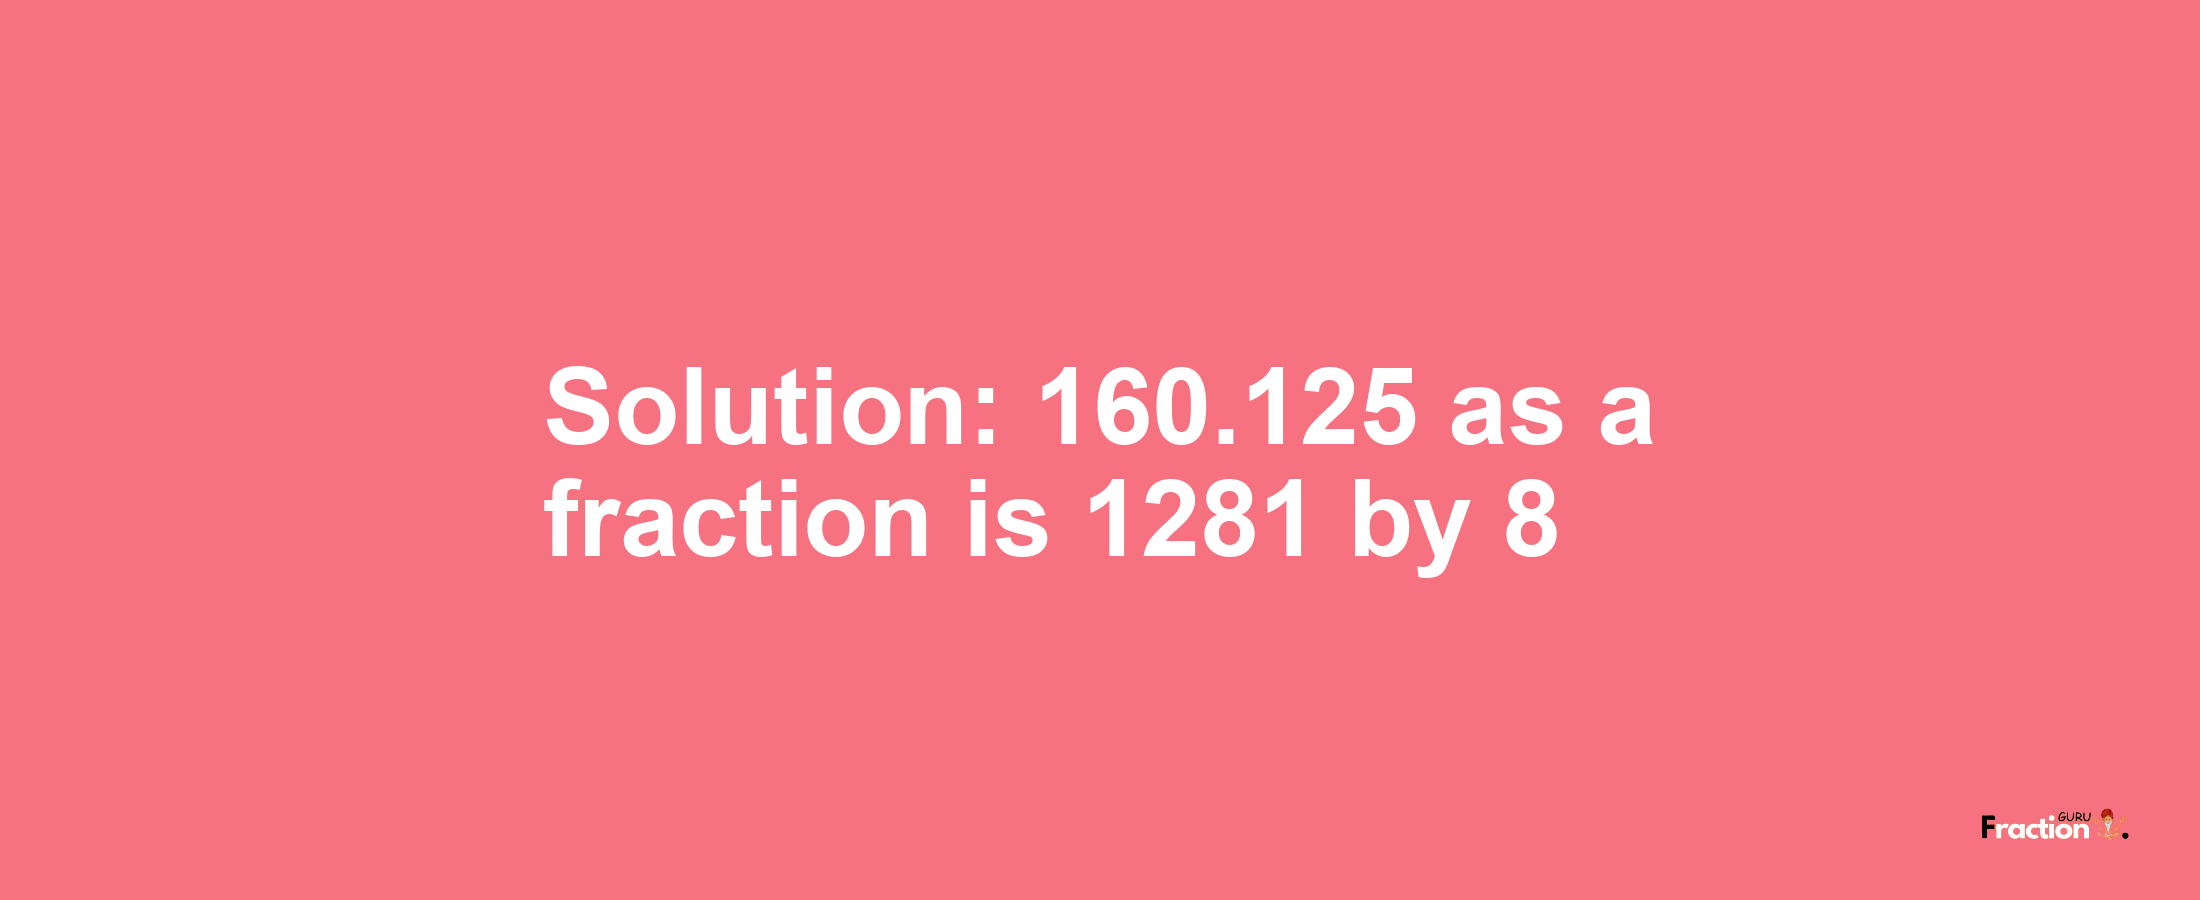 Solution:160.125 as a fraction is 1281/8